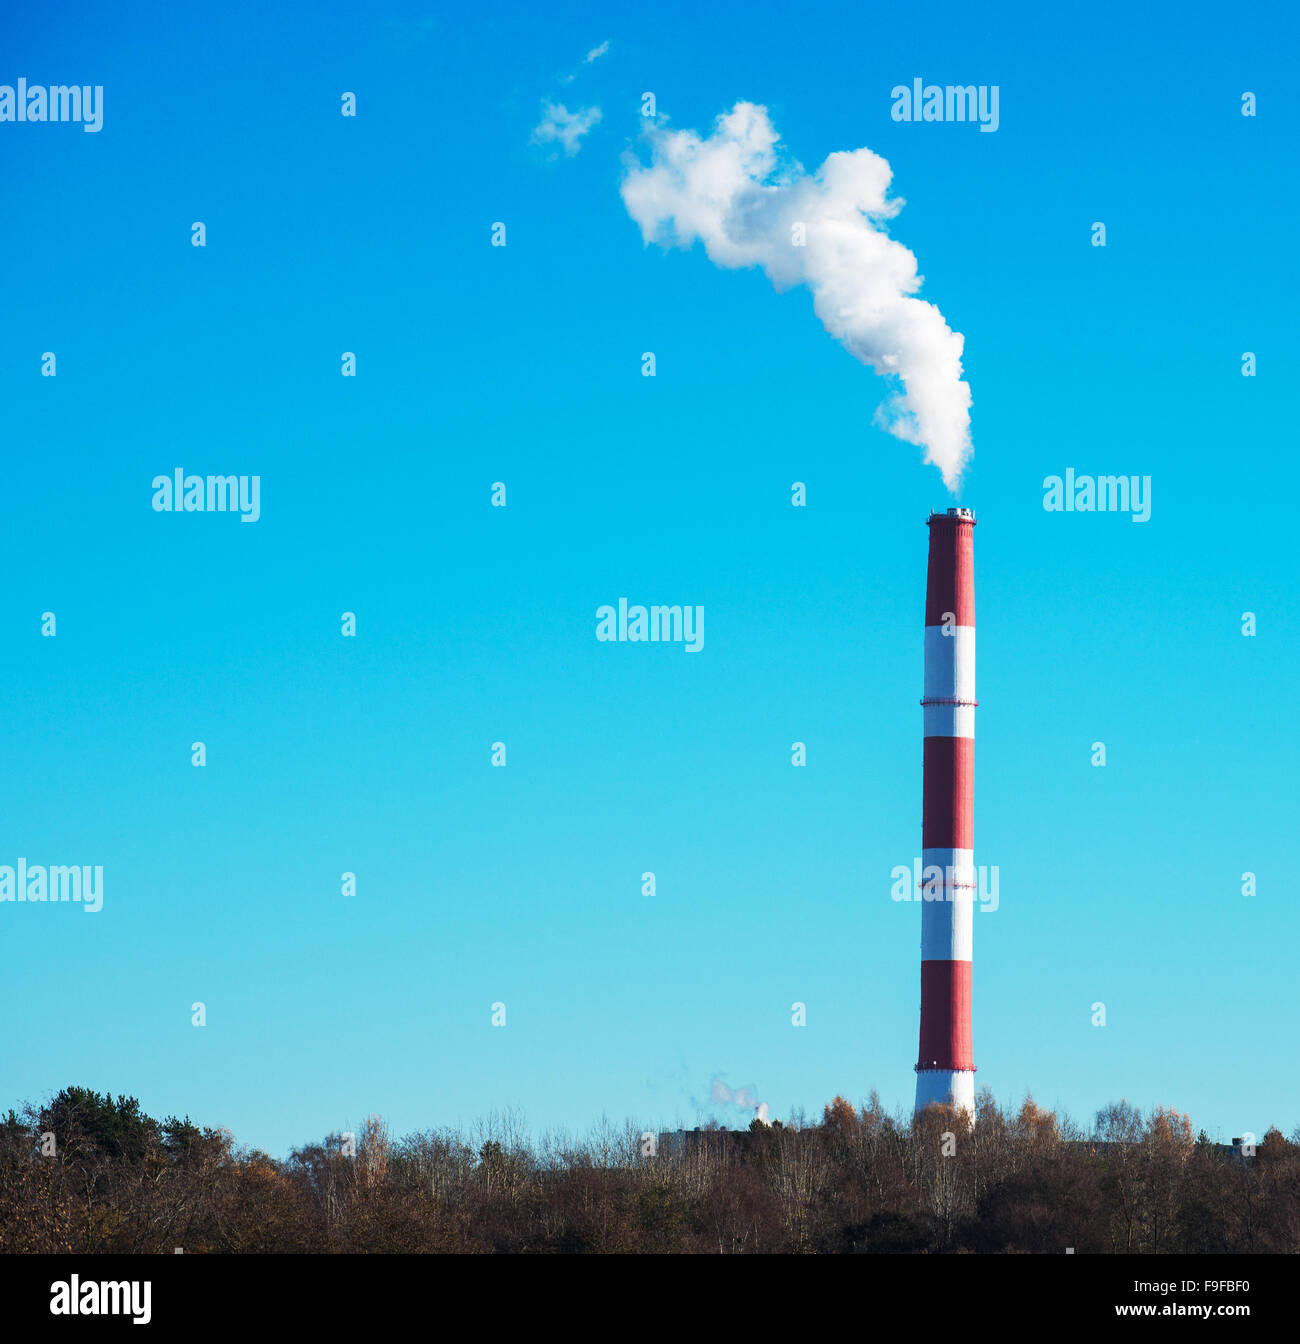 Air pollution. Dirty smog from big factory chimney. Stock Photo